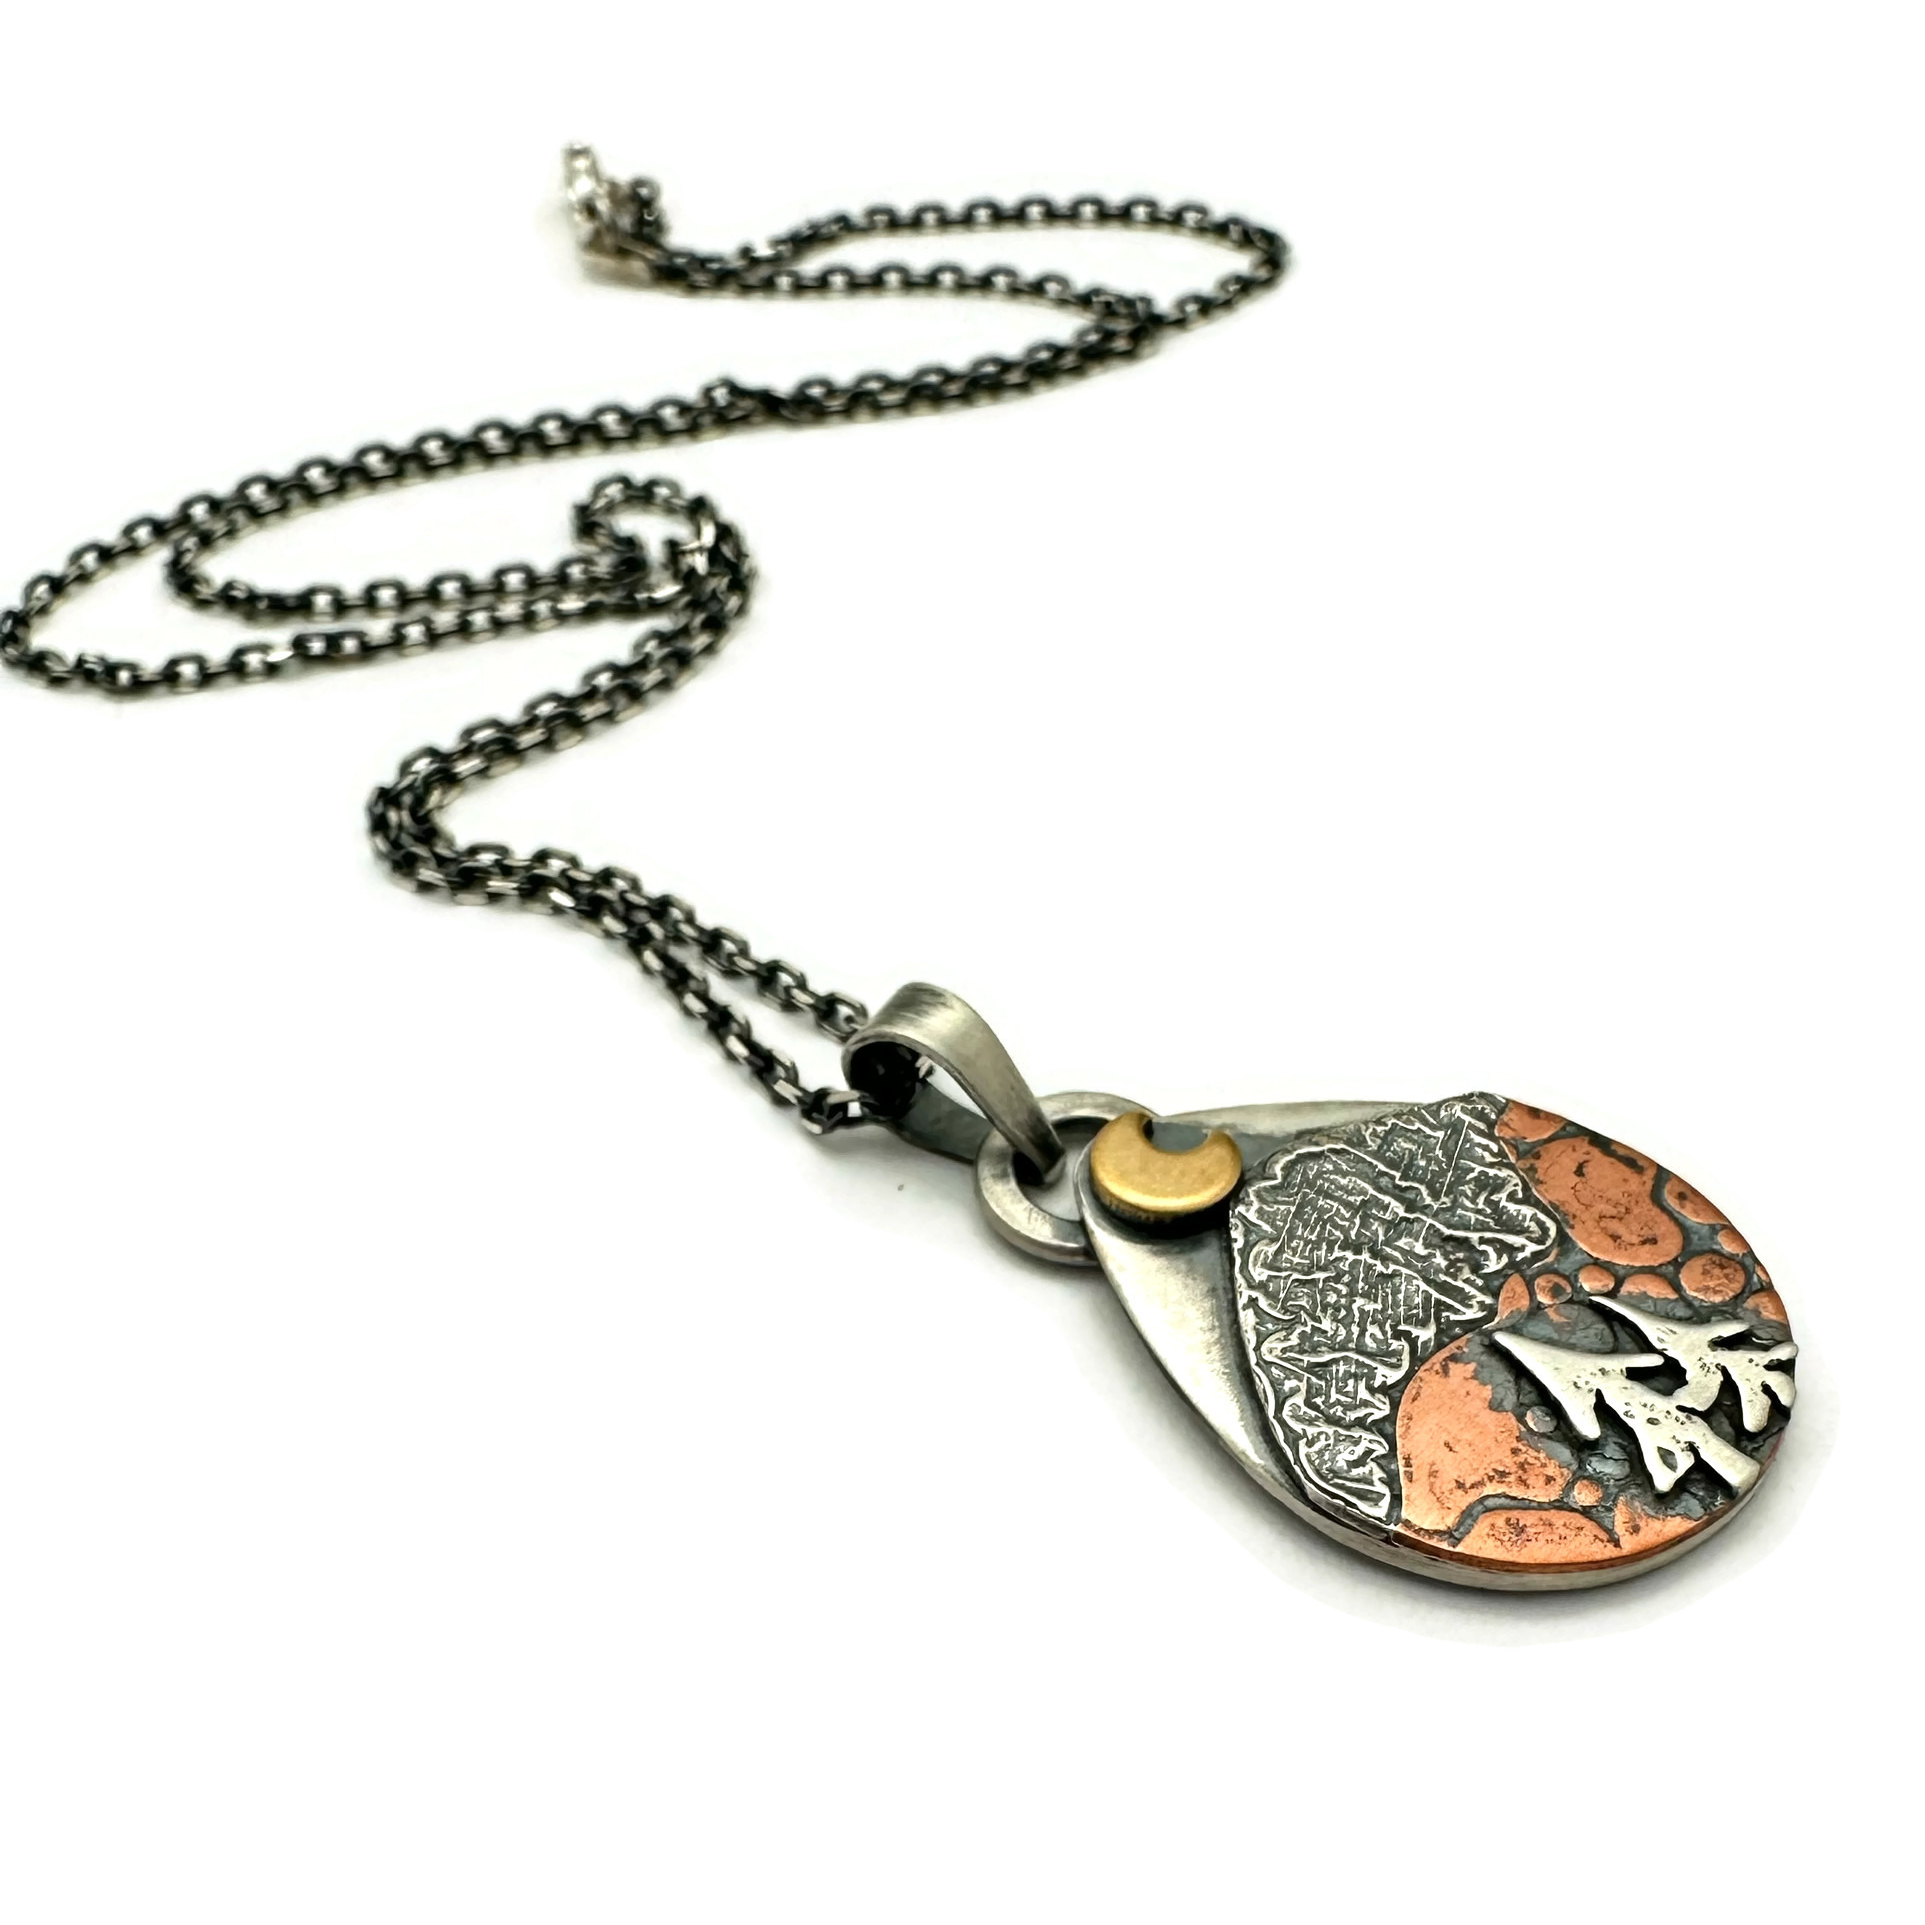 Two Pines Alpine Necklace